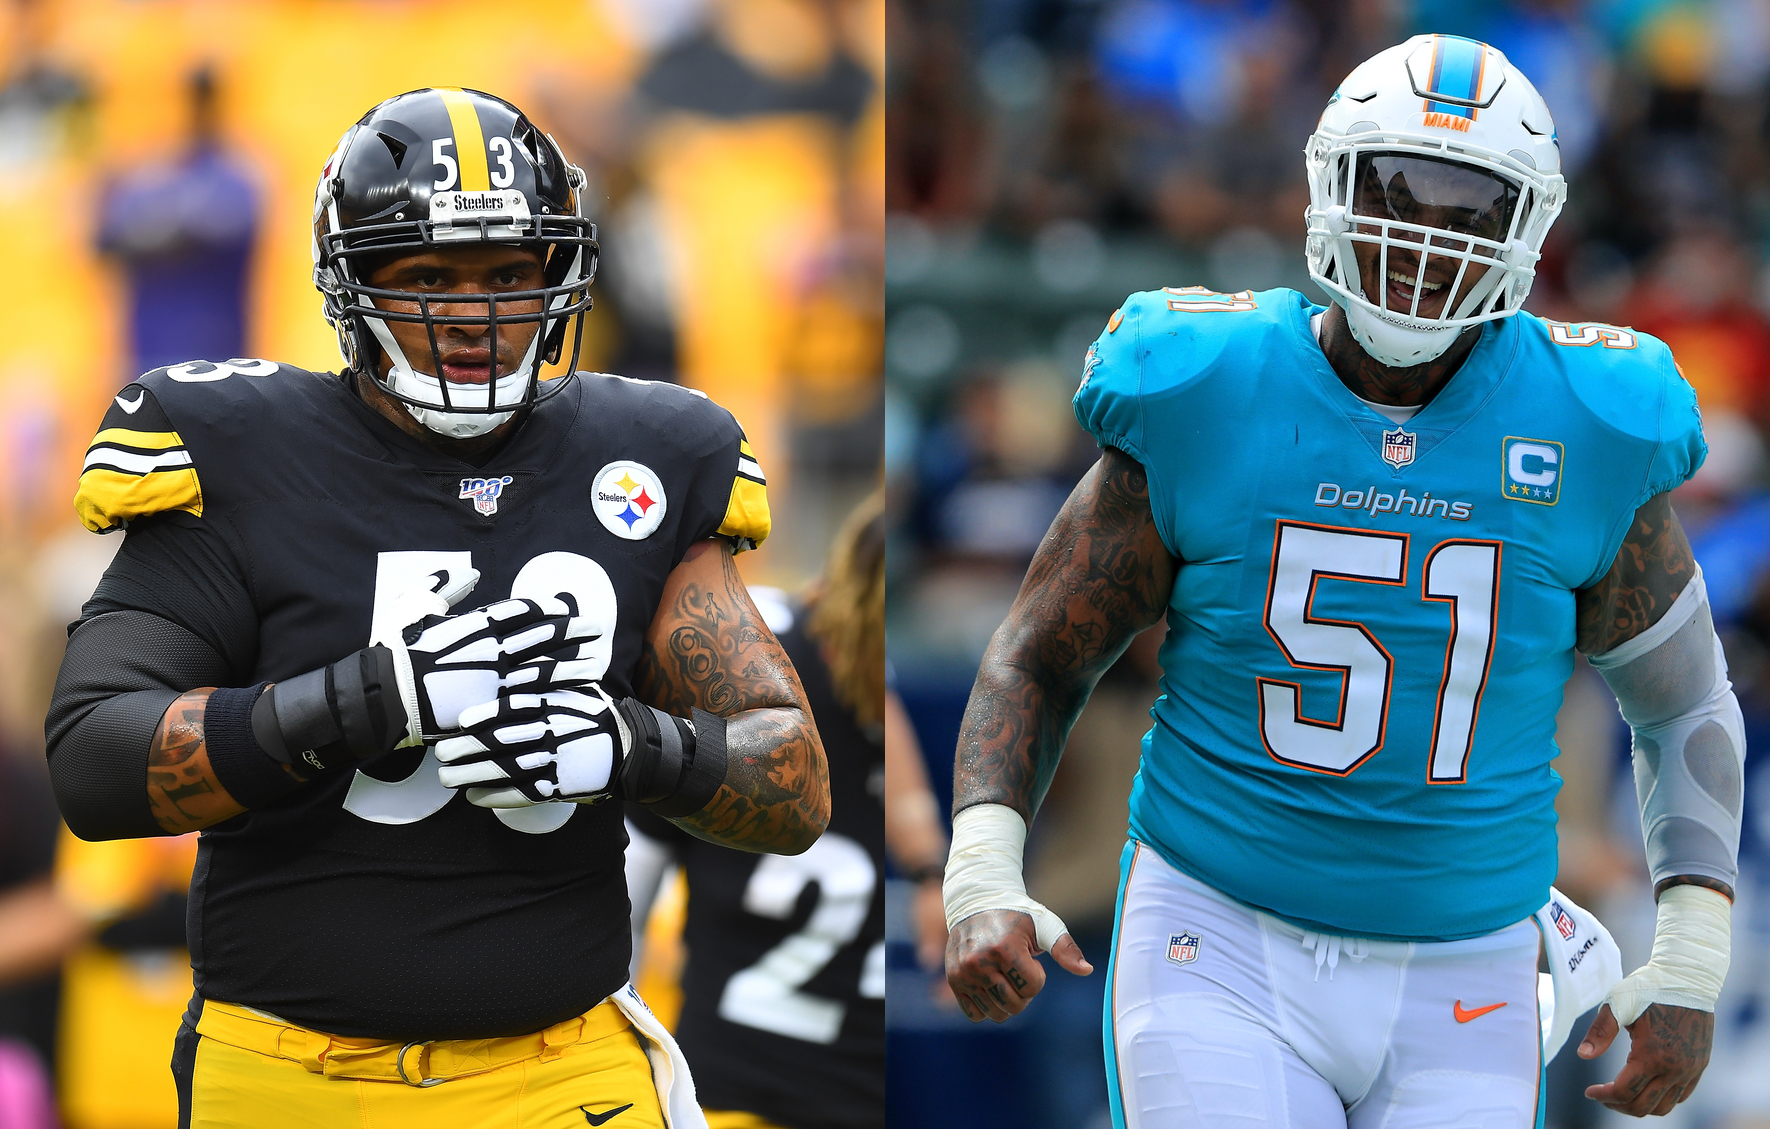 Steelers lineman Maurkice Pouncey, and Dolphins lineman Mike Pouncey